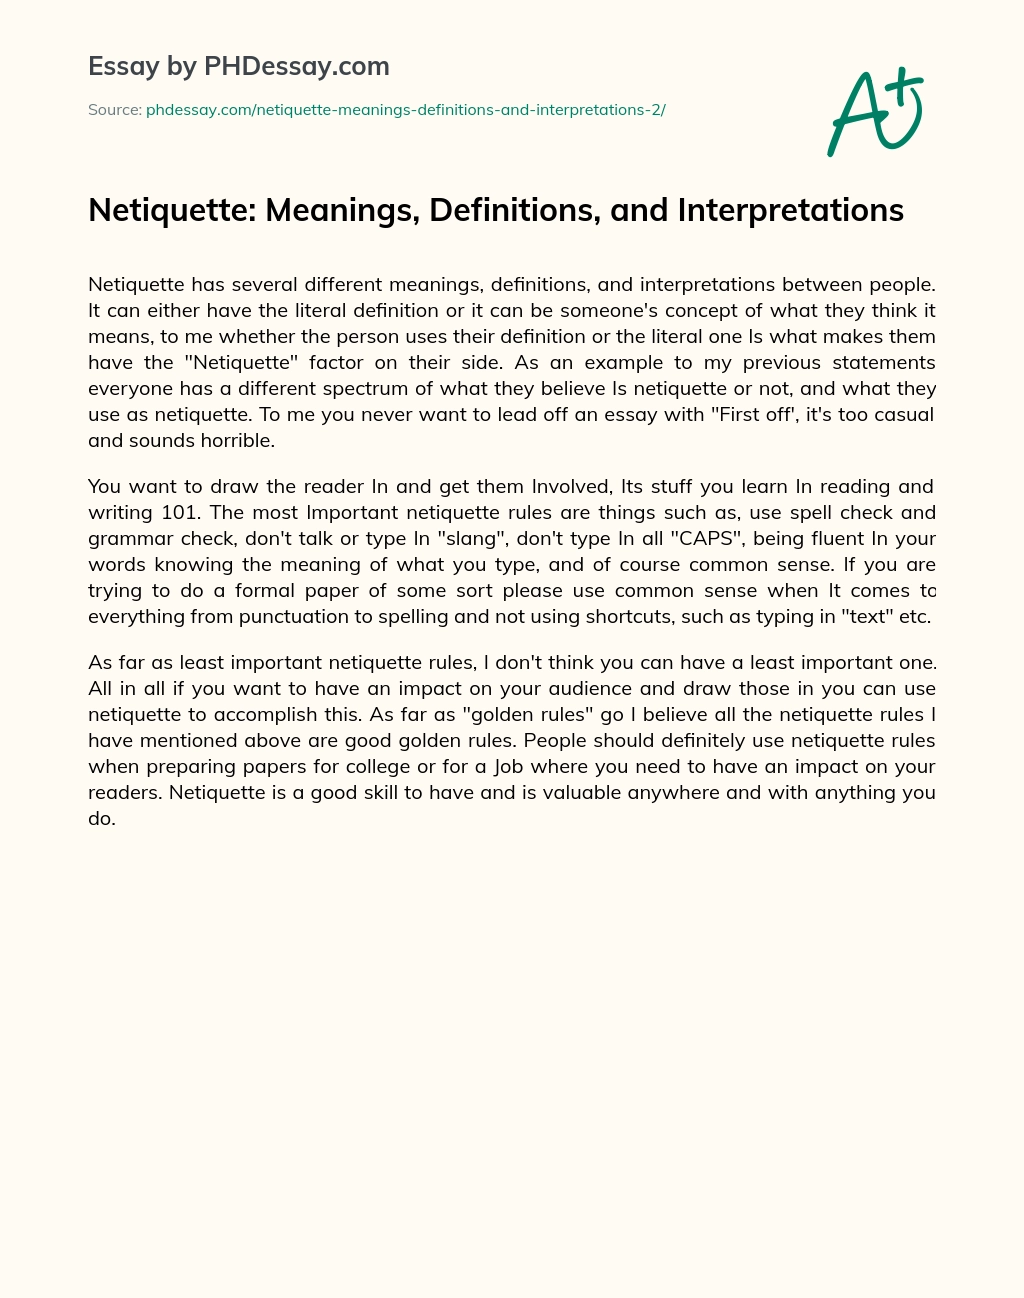 Netiquette: Meanings, Definitions, and Interpretations essay